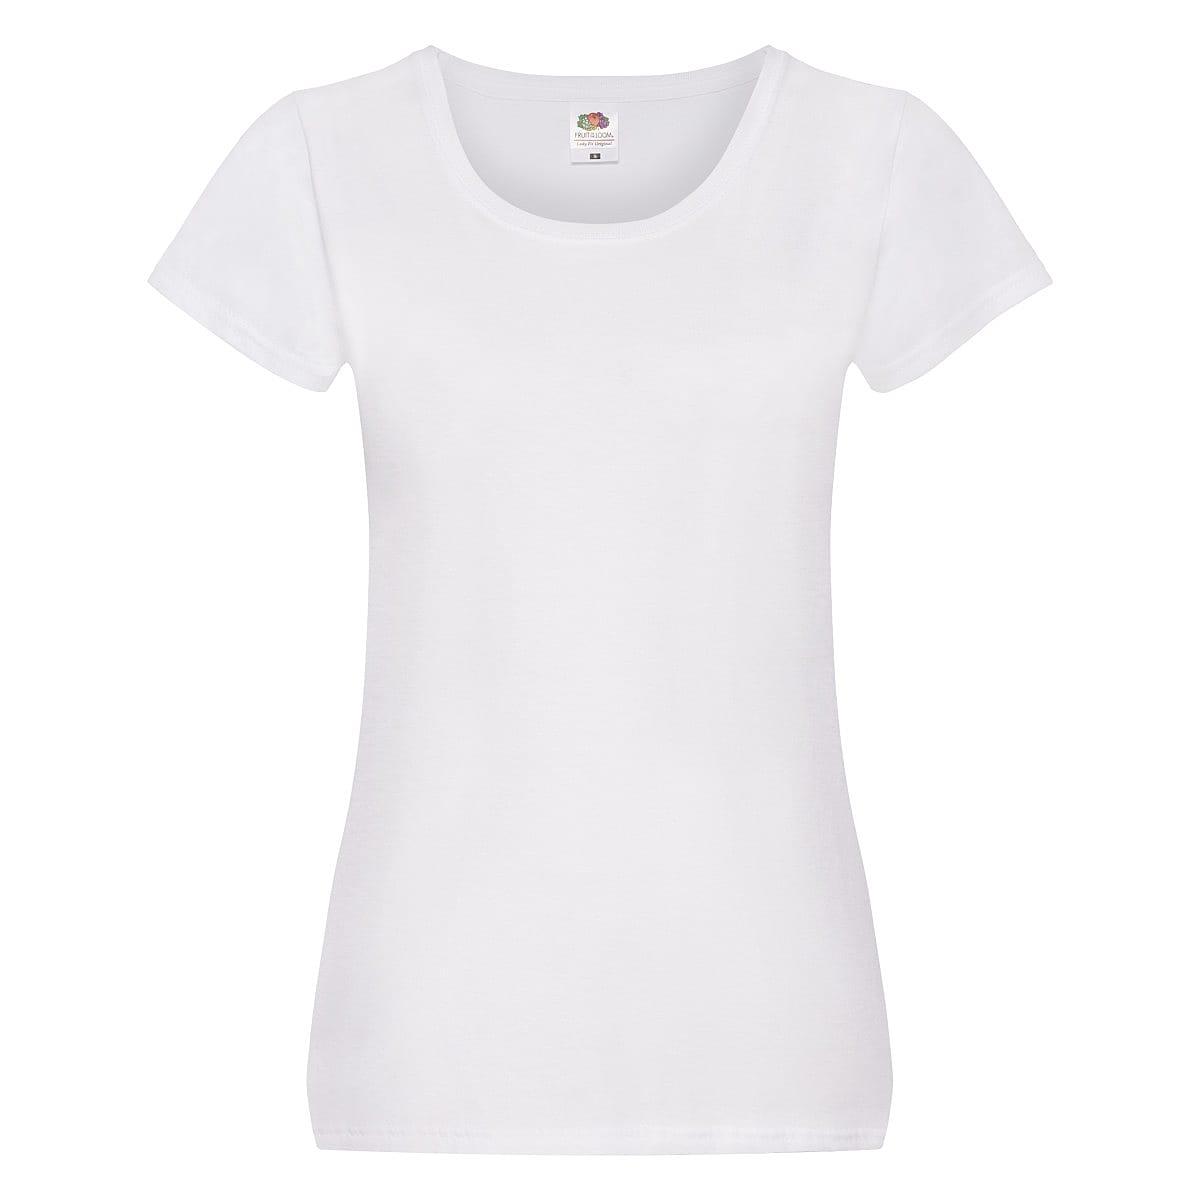 Fruit Of The Loom Lady Fit Original T-Shirt in White (Product Code: 61420)